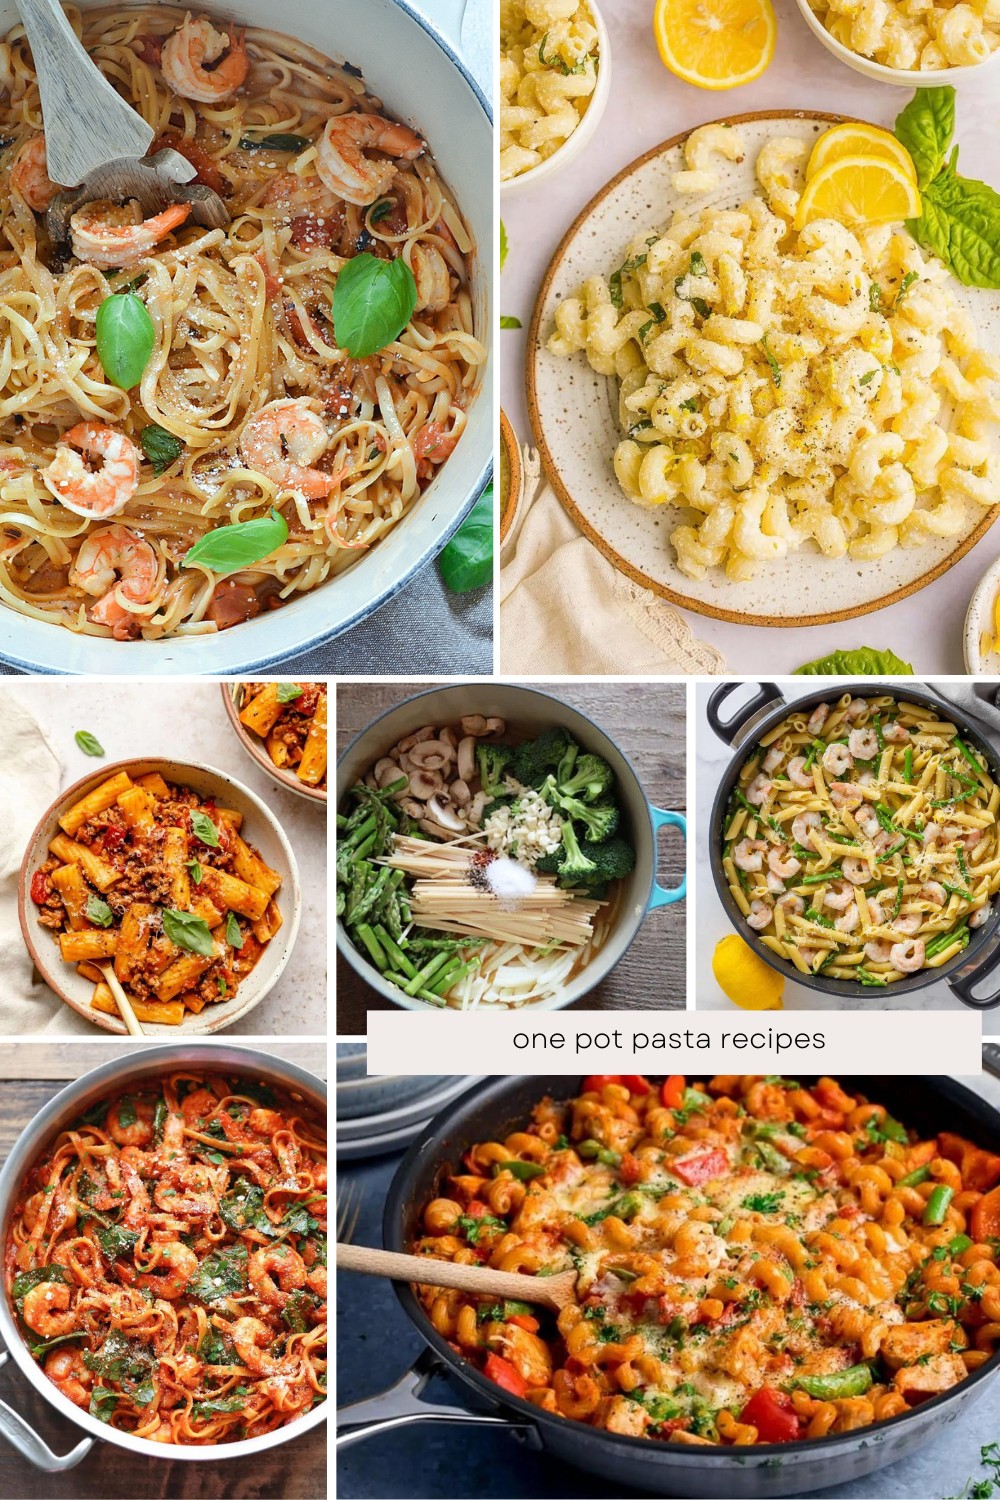 Tired of complicated dinners? These one pot pasta recipes are a lifesaver! Just chop, toss, and cook everything in one pot – even the pasta! Perfect for busy nights when you want a delicious meal without the hassle. 🍳🥦🍅 #EasyDinners #OnePotMeals







